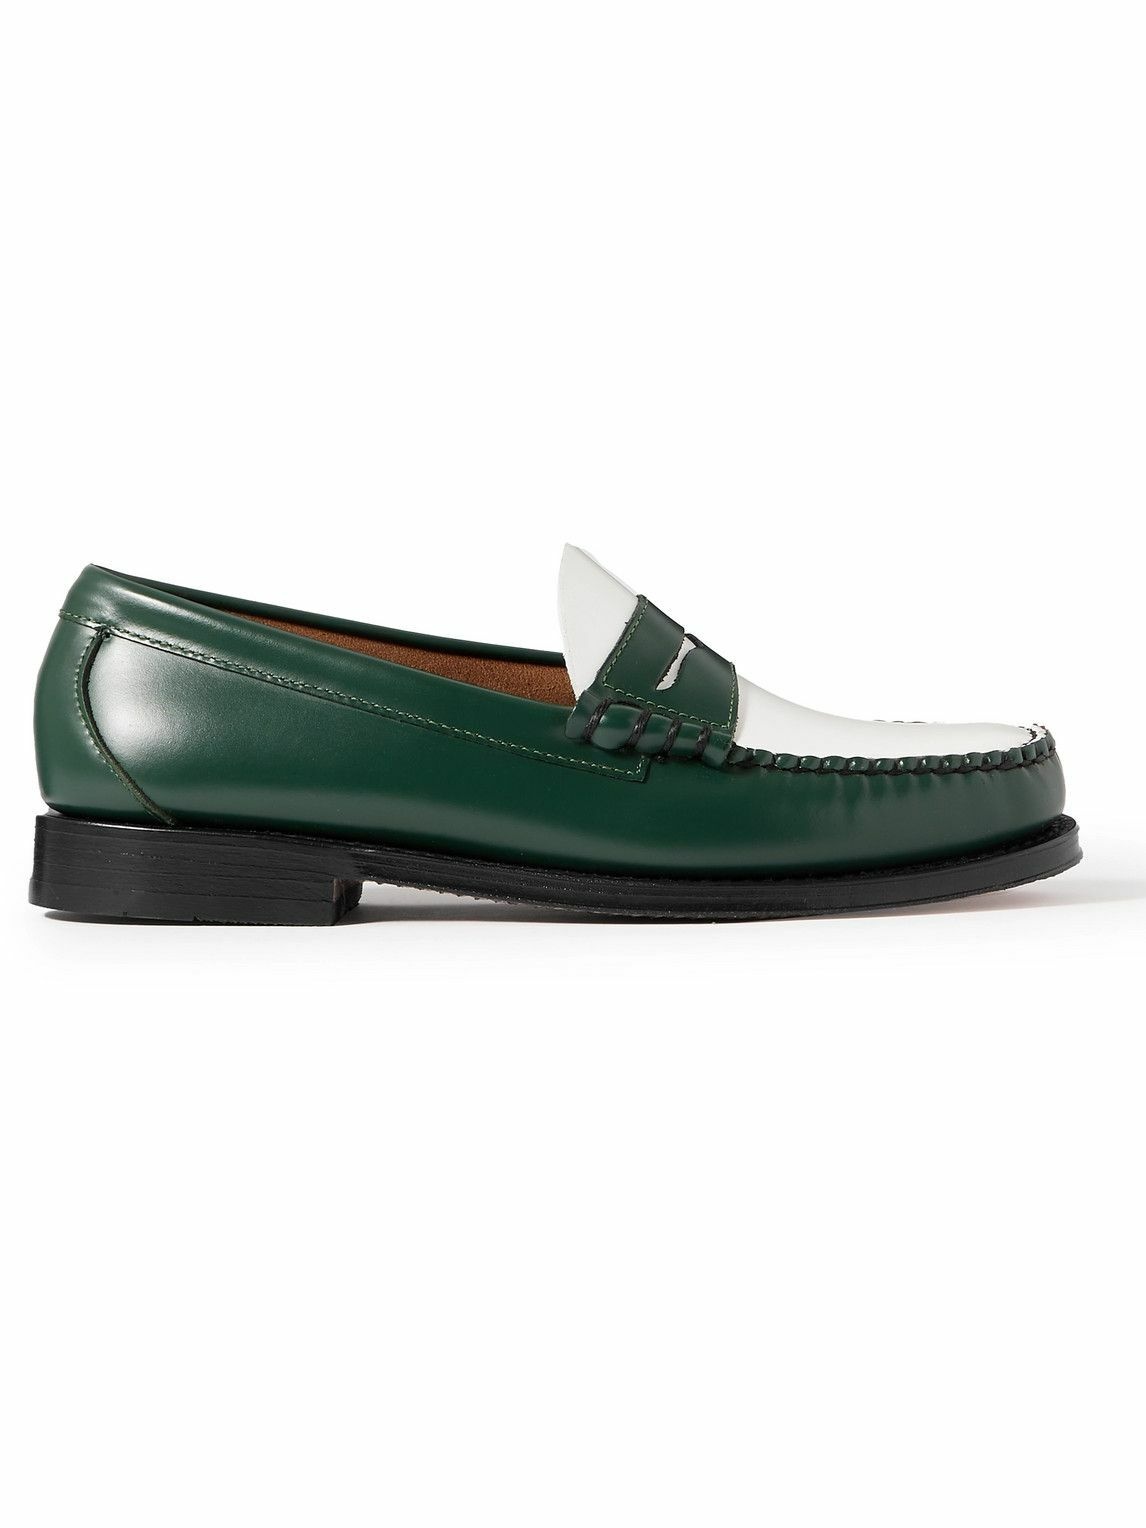 G.H. Bass & Co. - Weejuns Heritage Larson Two-Tone Leather Penny ...